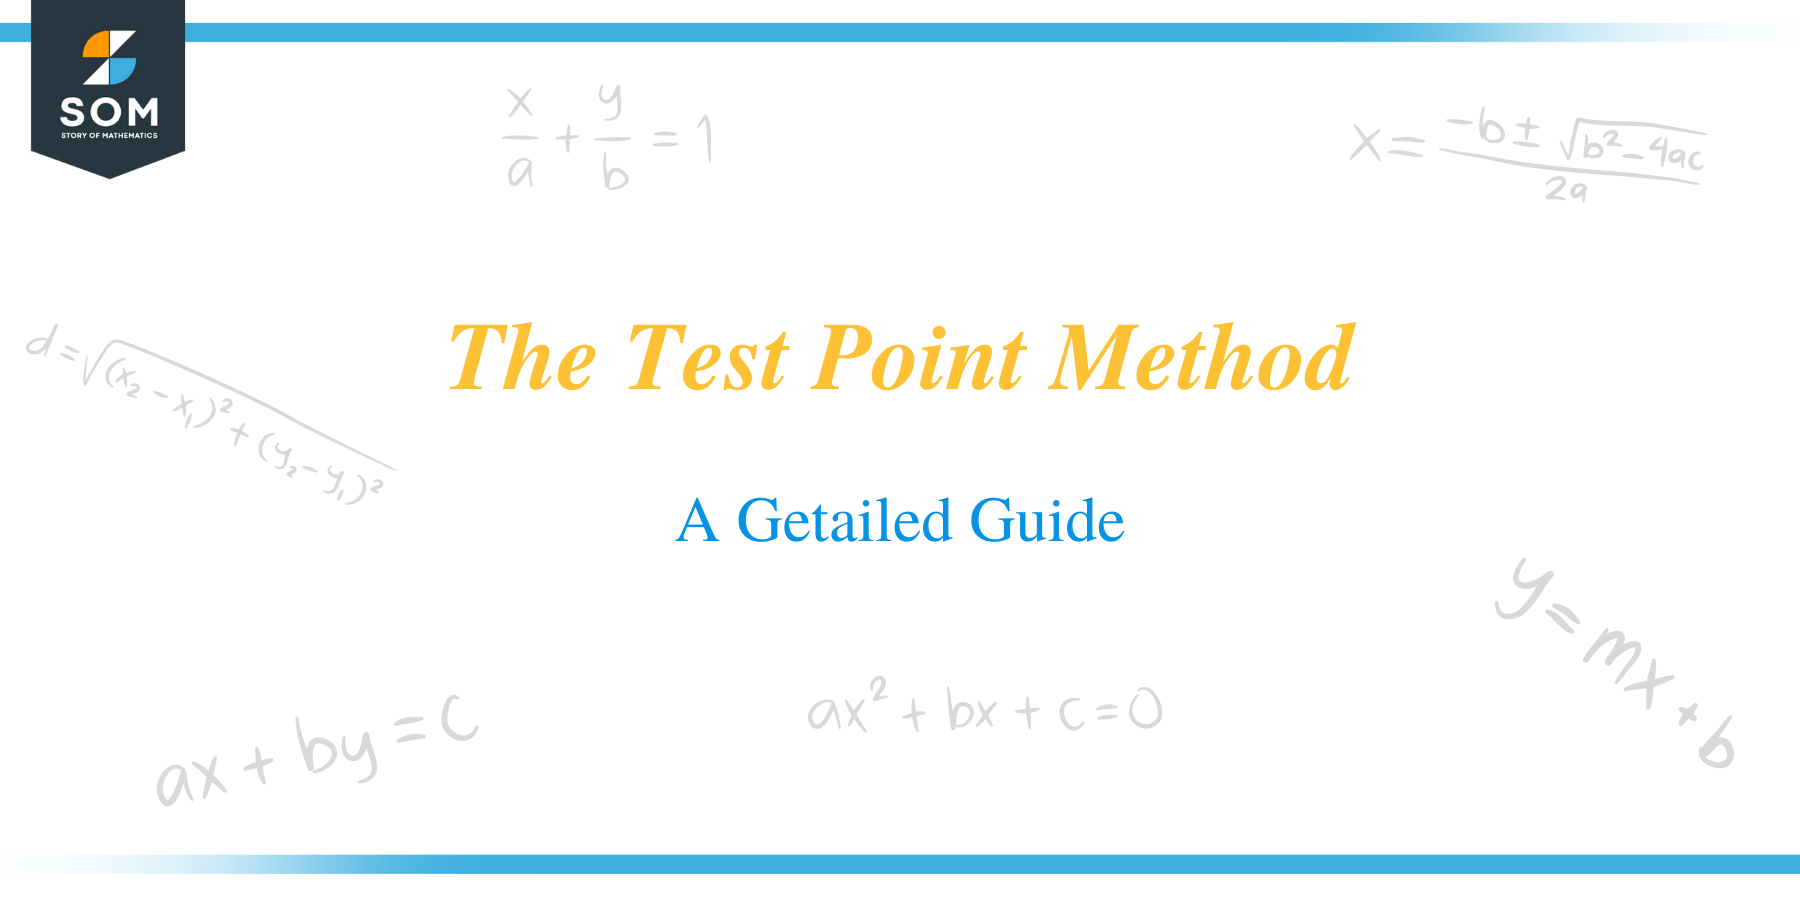 The Test Point Method title